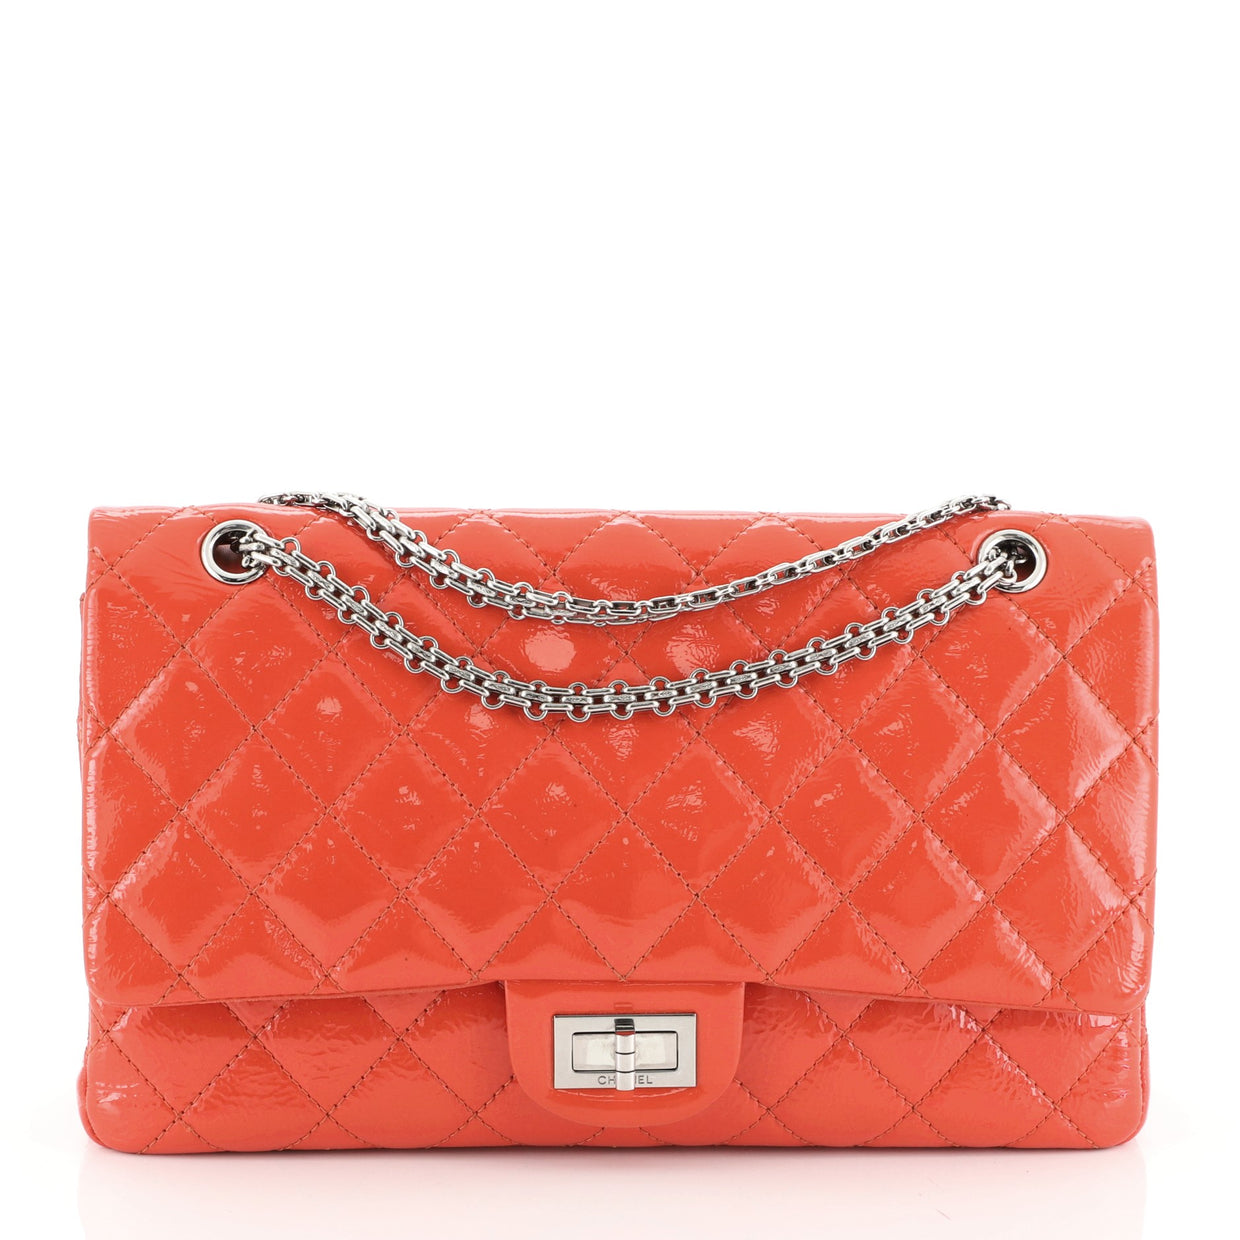 Chanel Reissue 2.55 Flap Bag Quilted Glazed Calfskin 227 Red 445164